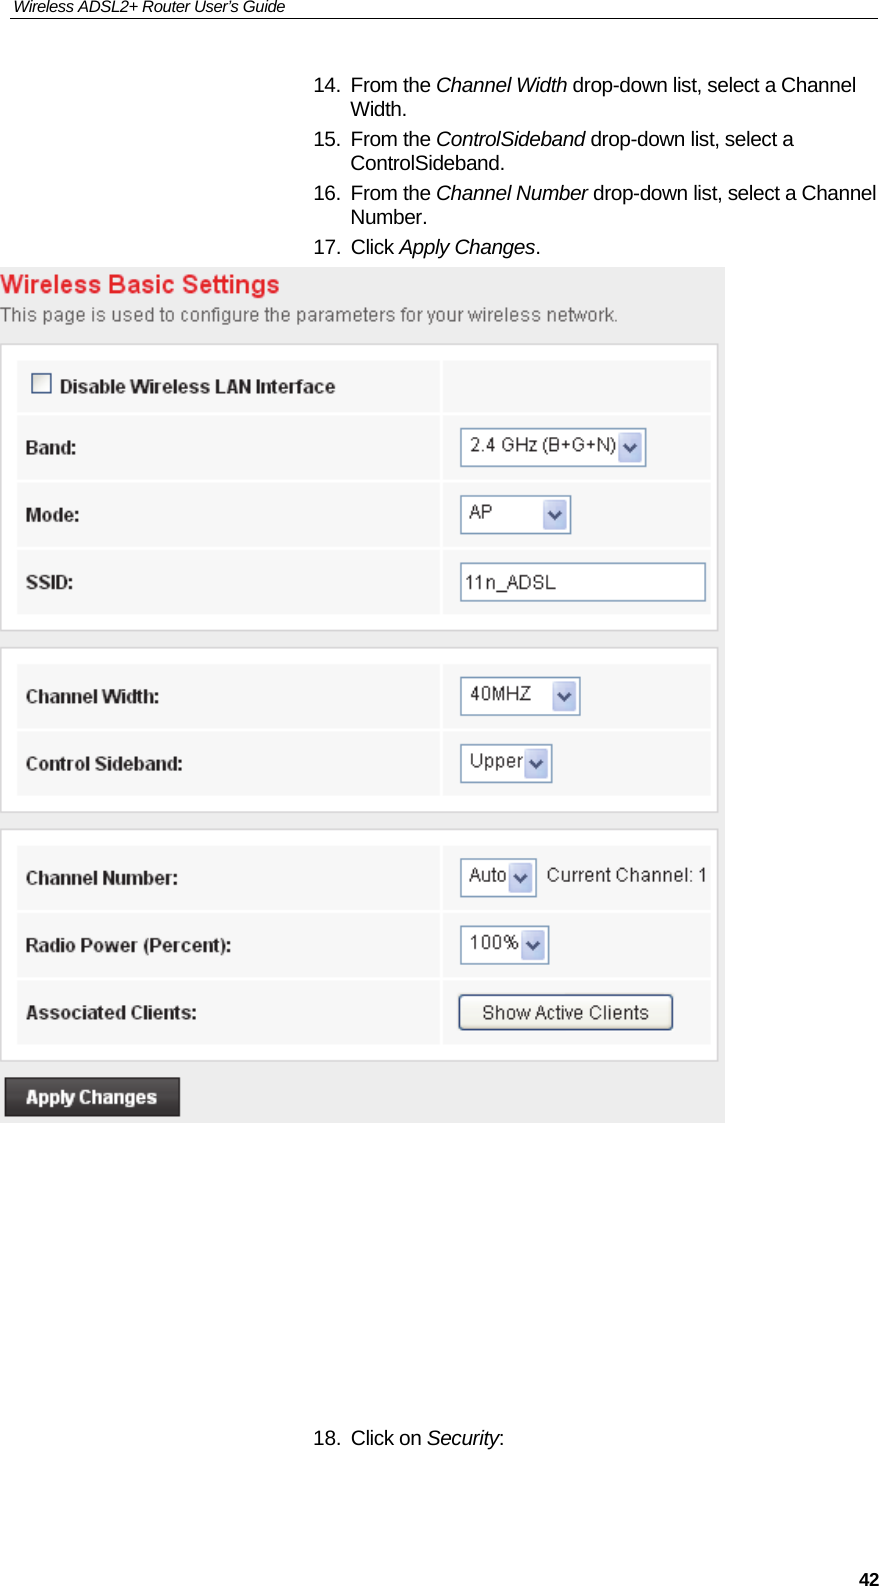 Wireless ADSL2+ Router User’s Guide     4214. From the Channel Width drop-down list, select a Channel Width. 15. From the ControlSideband drop-down list, select a ControlSideband. 16. From the Channel Number drop-down list, select a Channel Number. 17. Click Apply Changes.          18. Click on Security: 